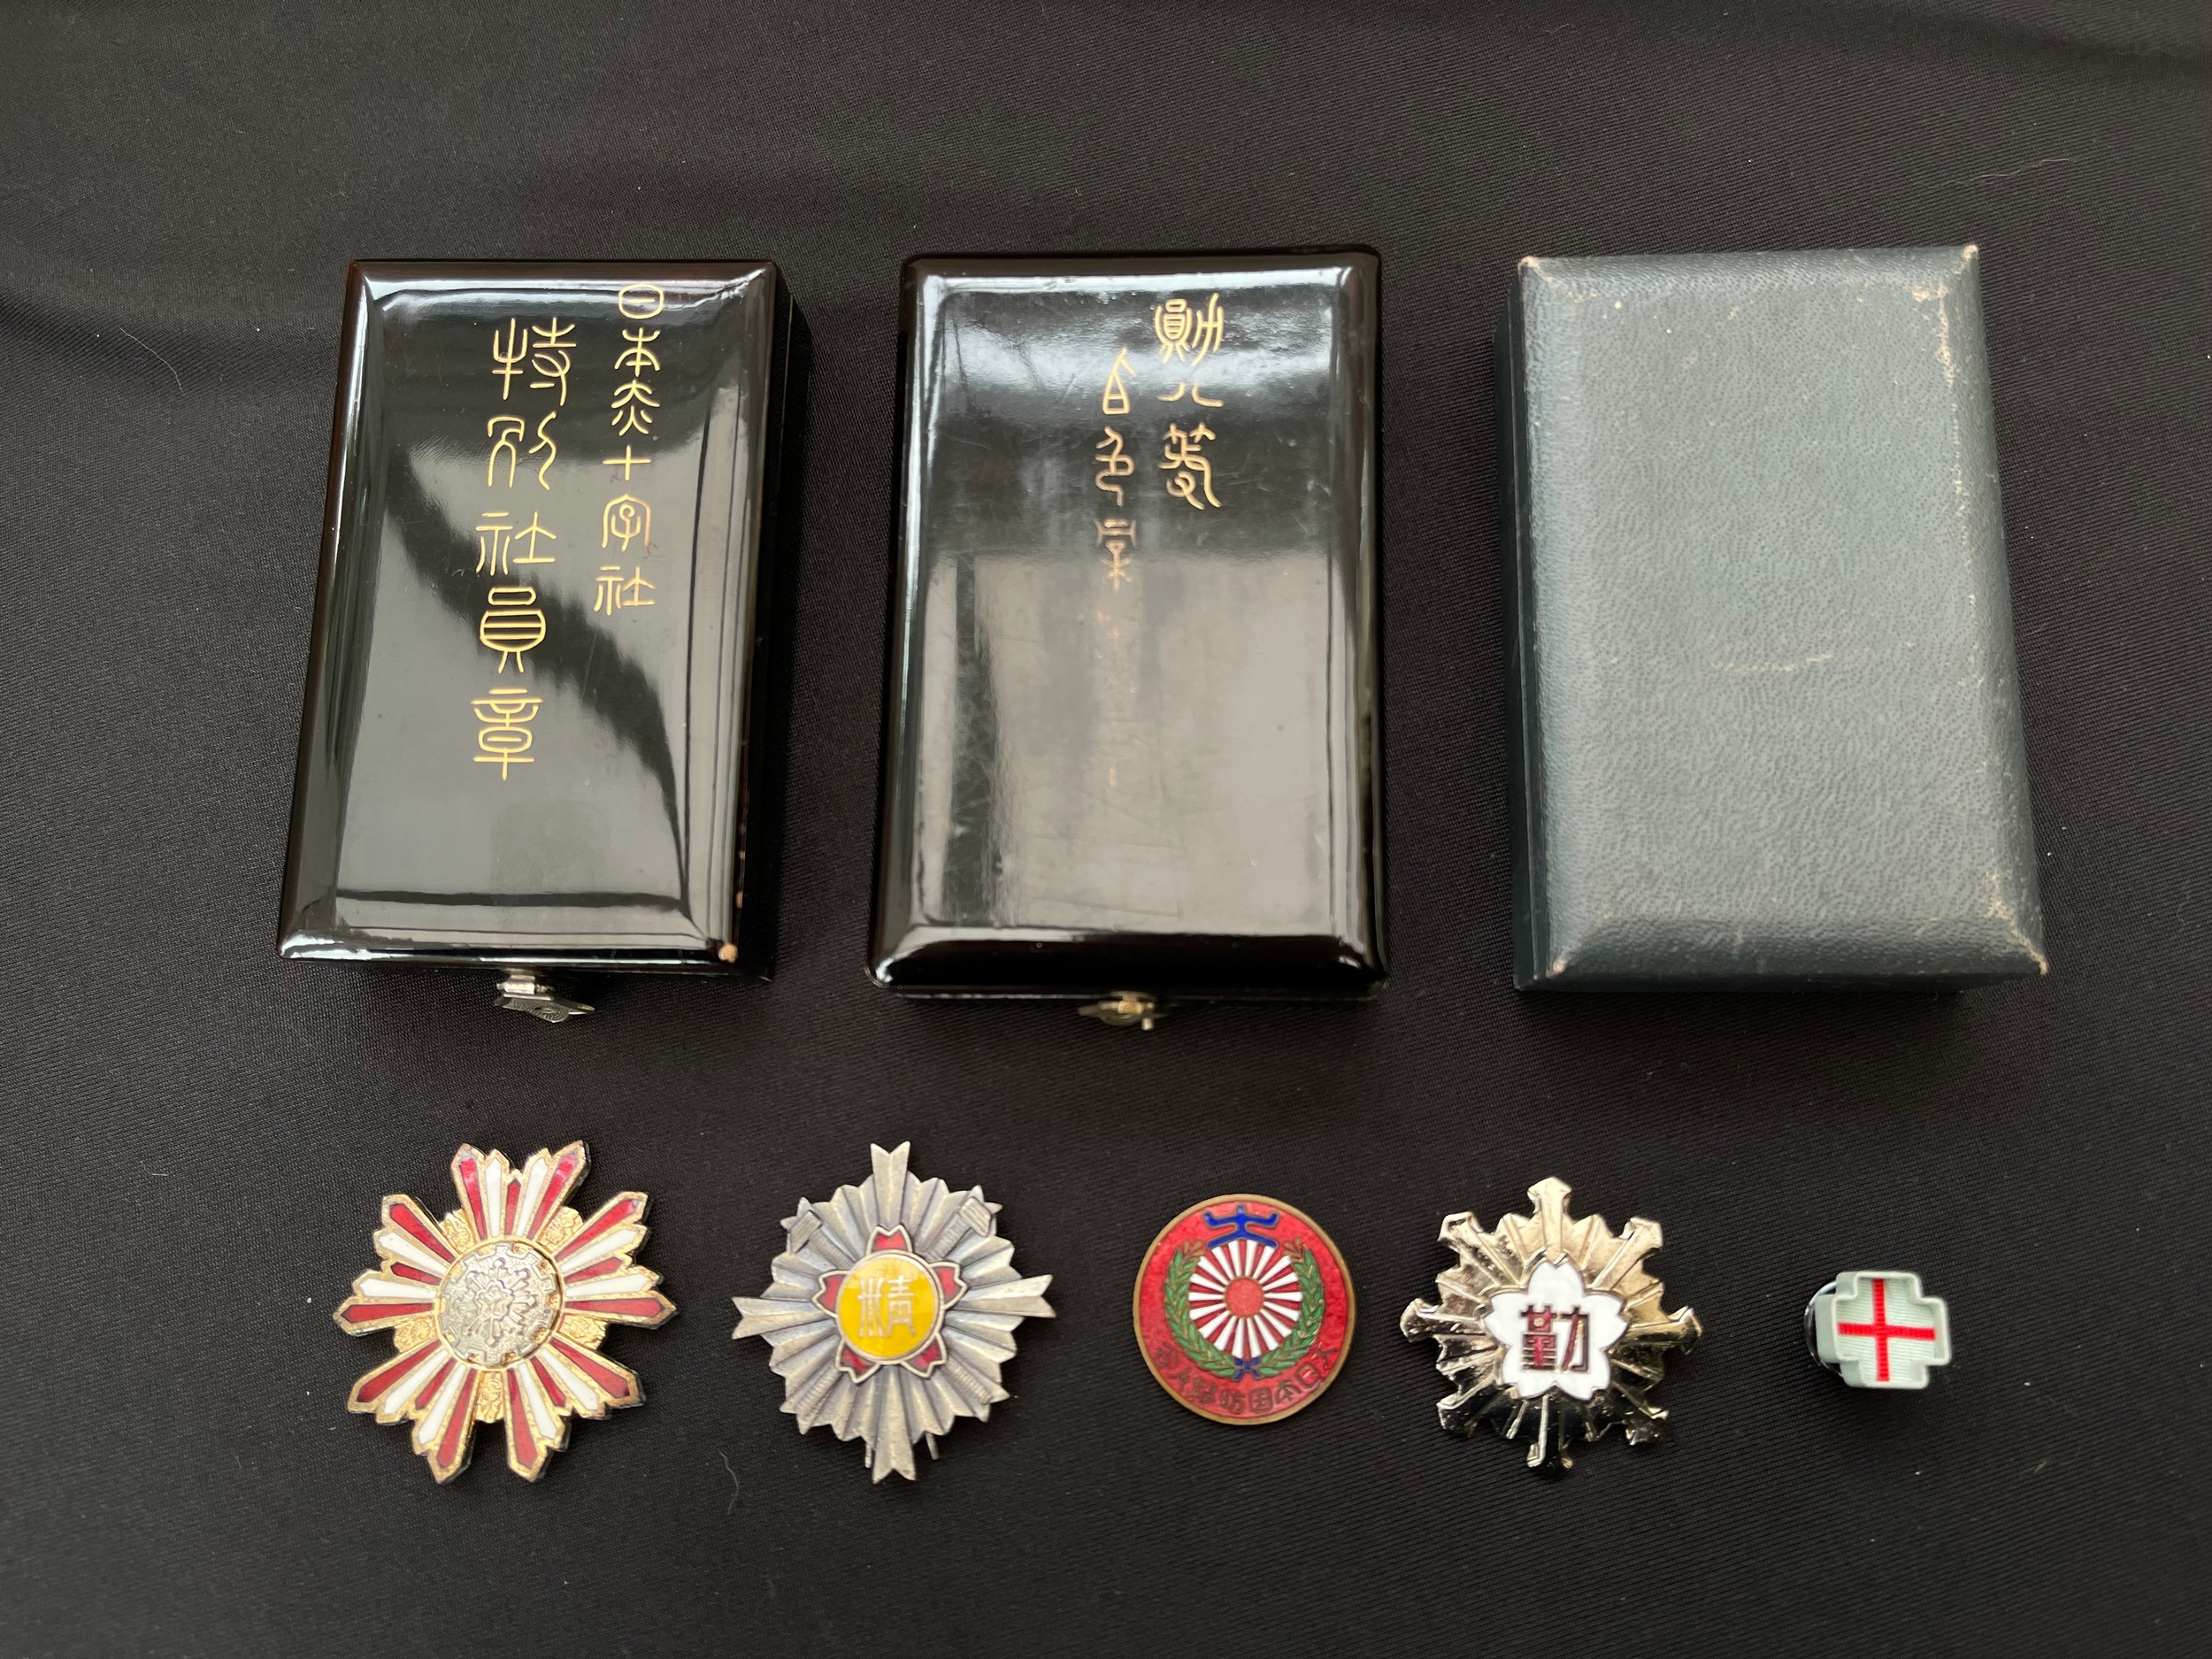 Japanese Patriotic enamel badges and three empty medal boxes.